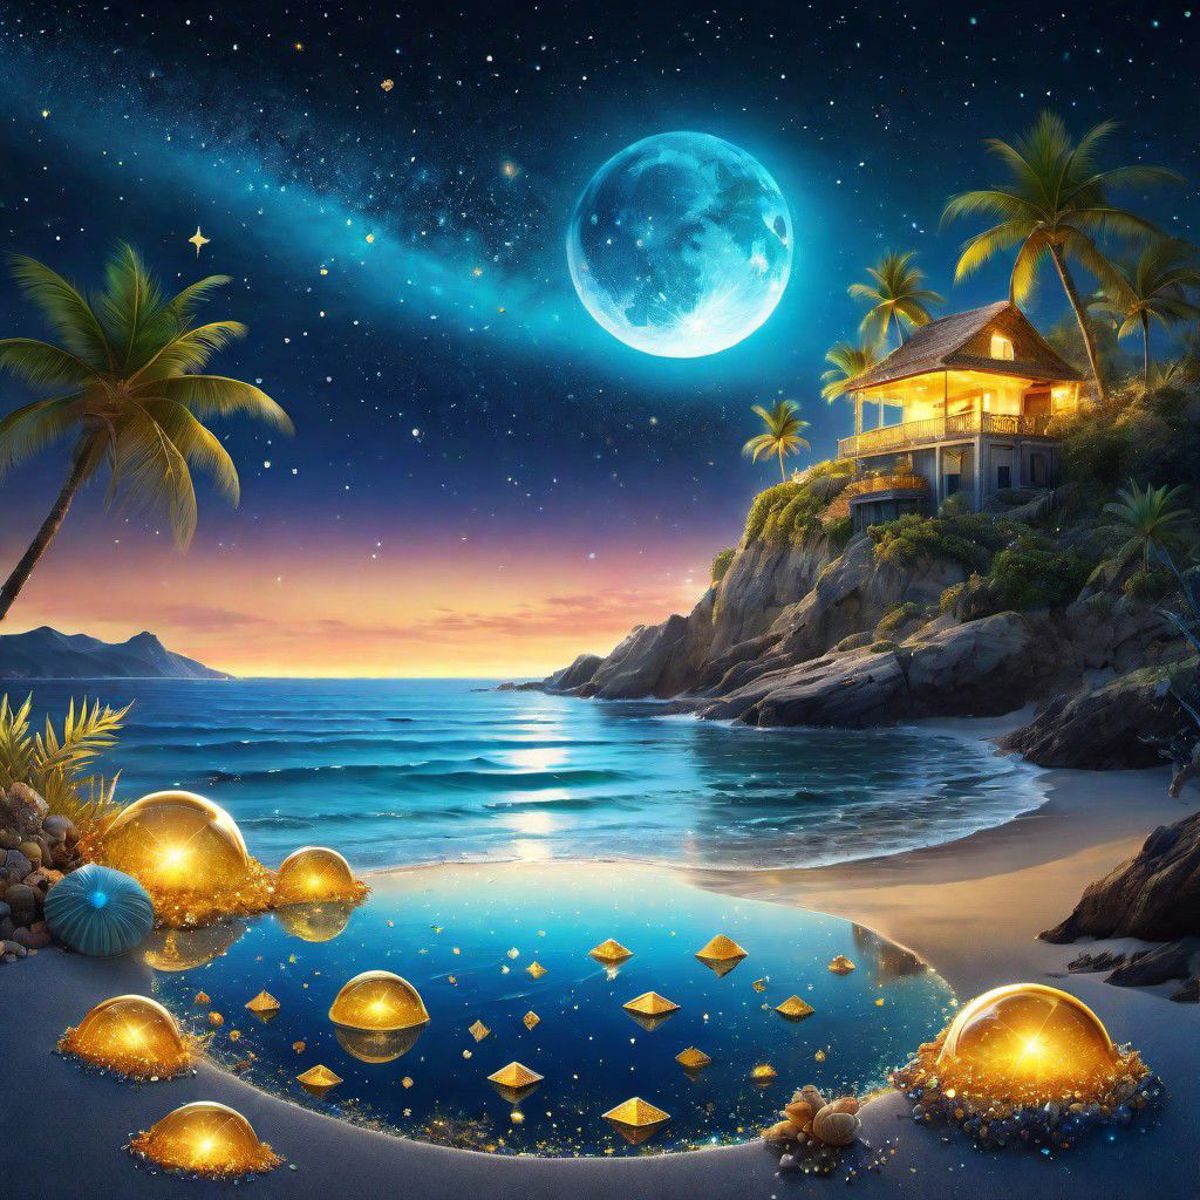 A painting with a house on a cliff, a beach, and a moon.